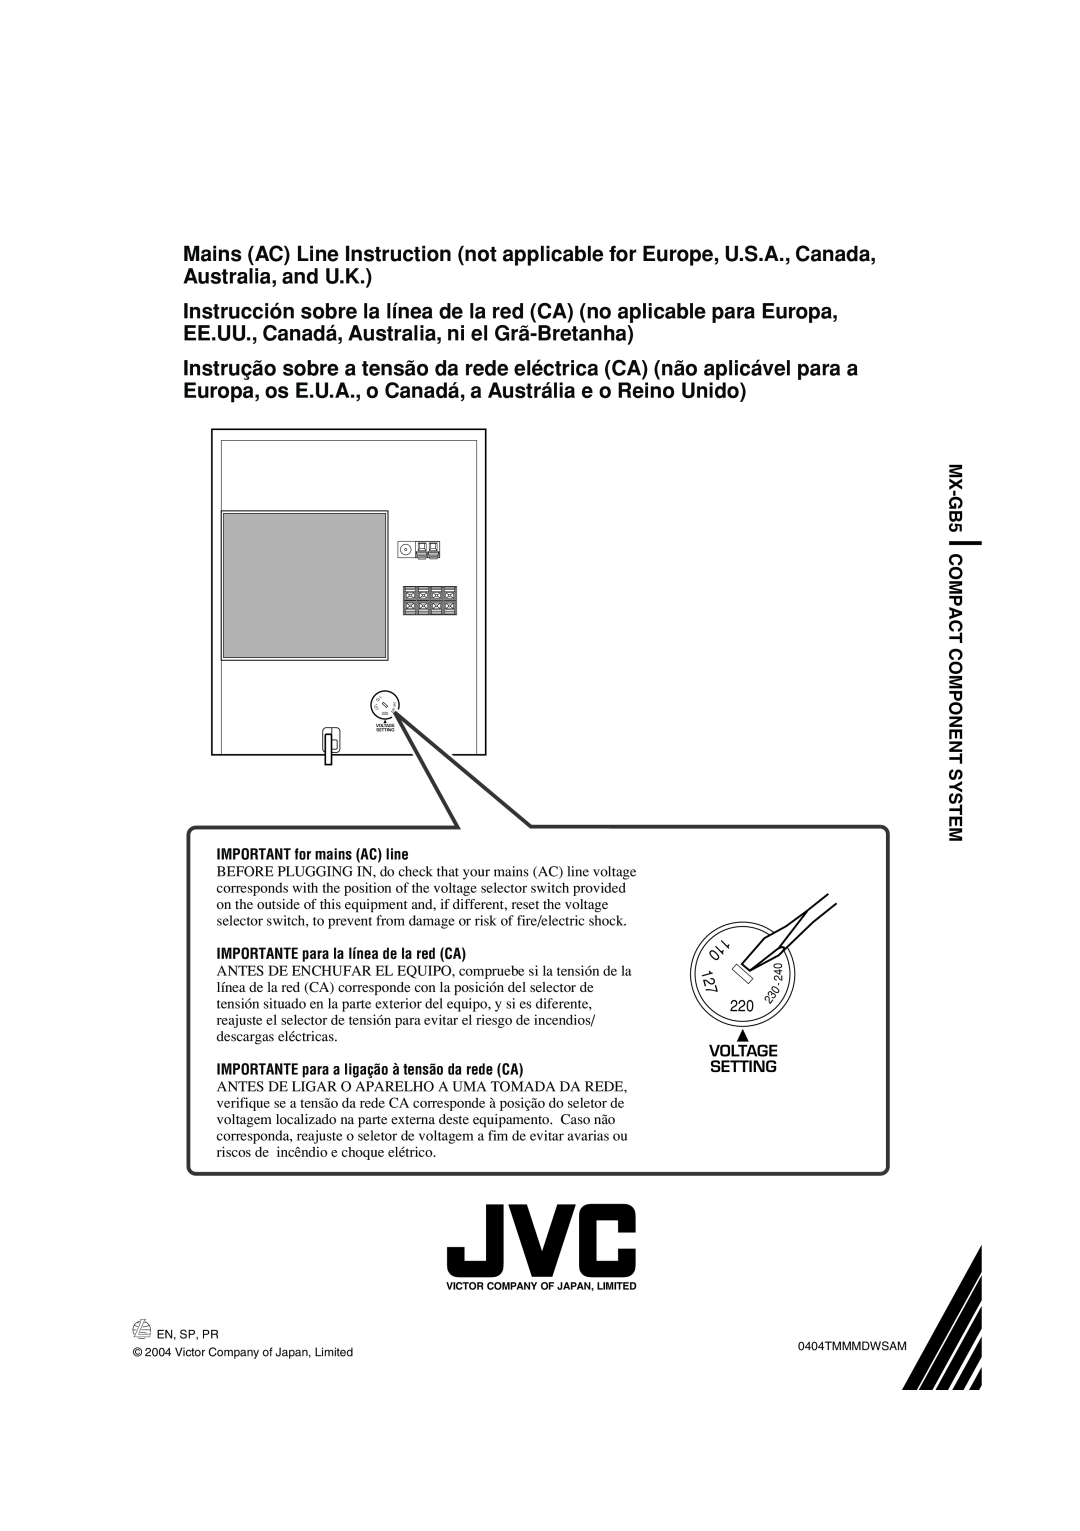 JVC manual MX-GB5 COMPACT COMPONENT SYSTEM, Voltage Setting 